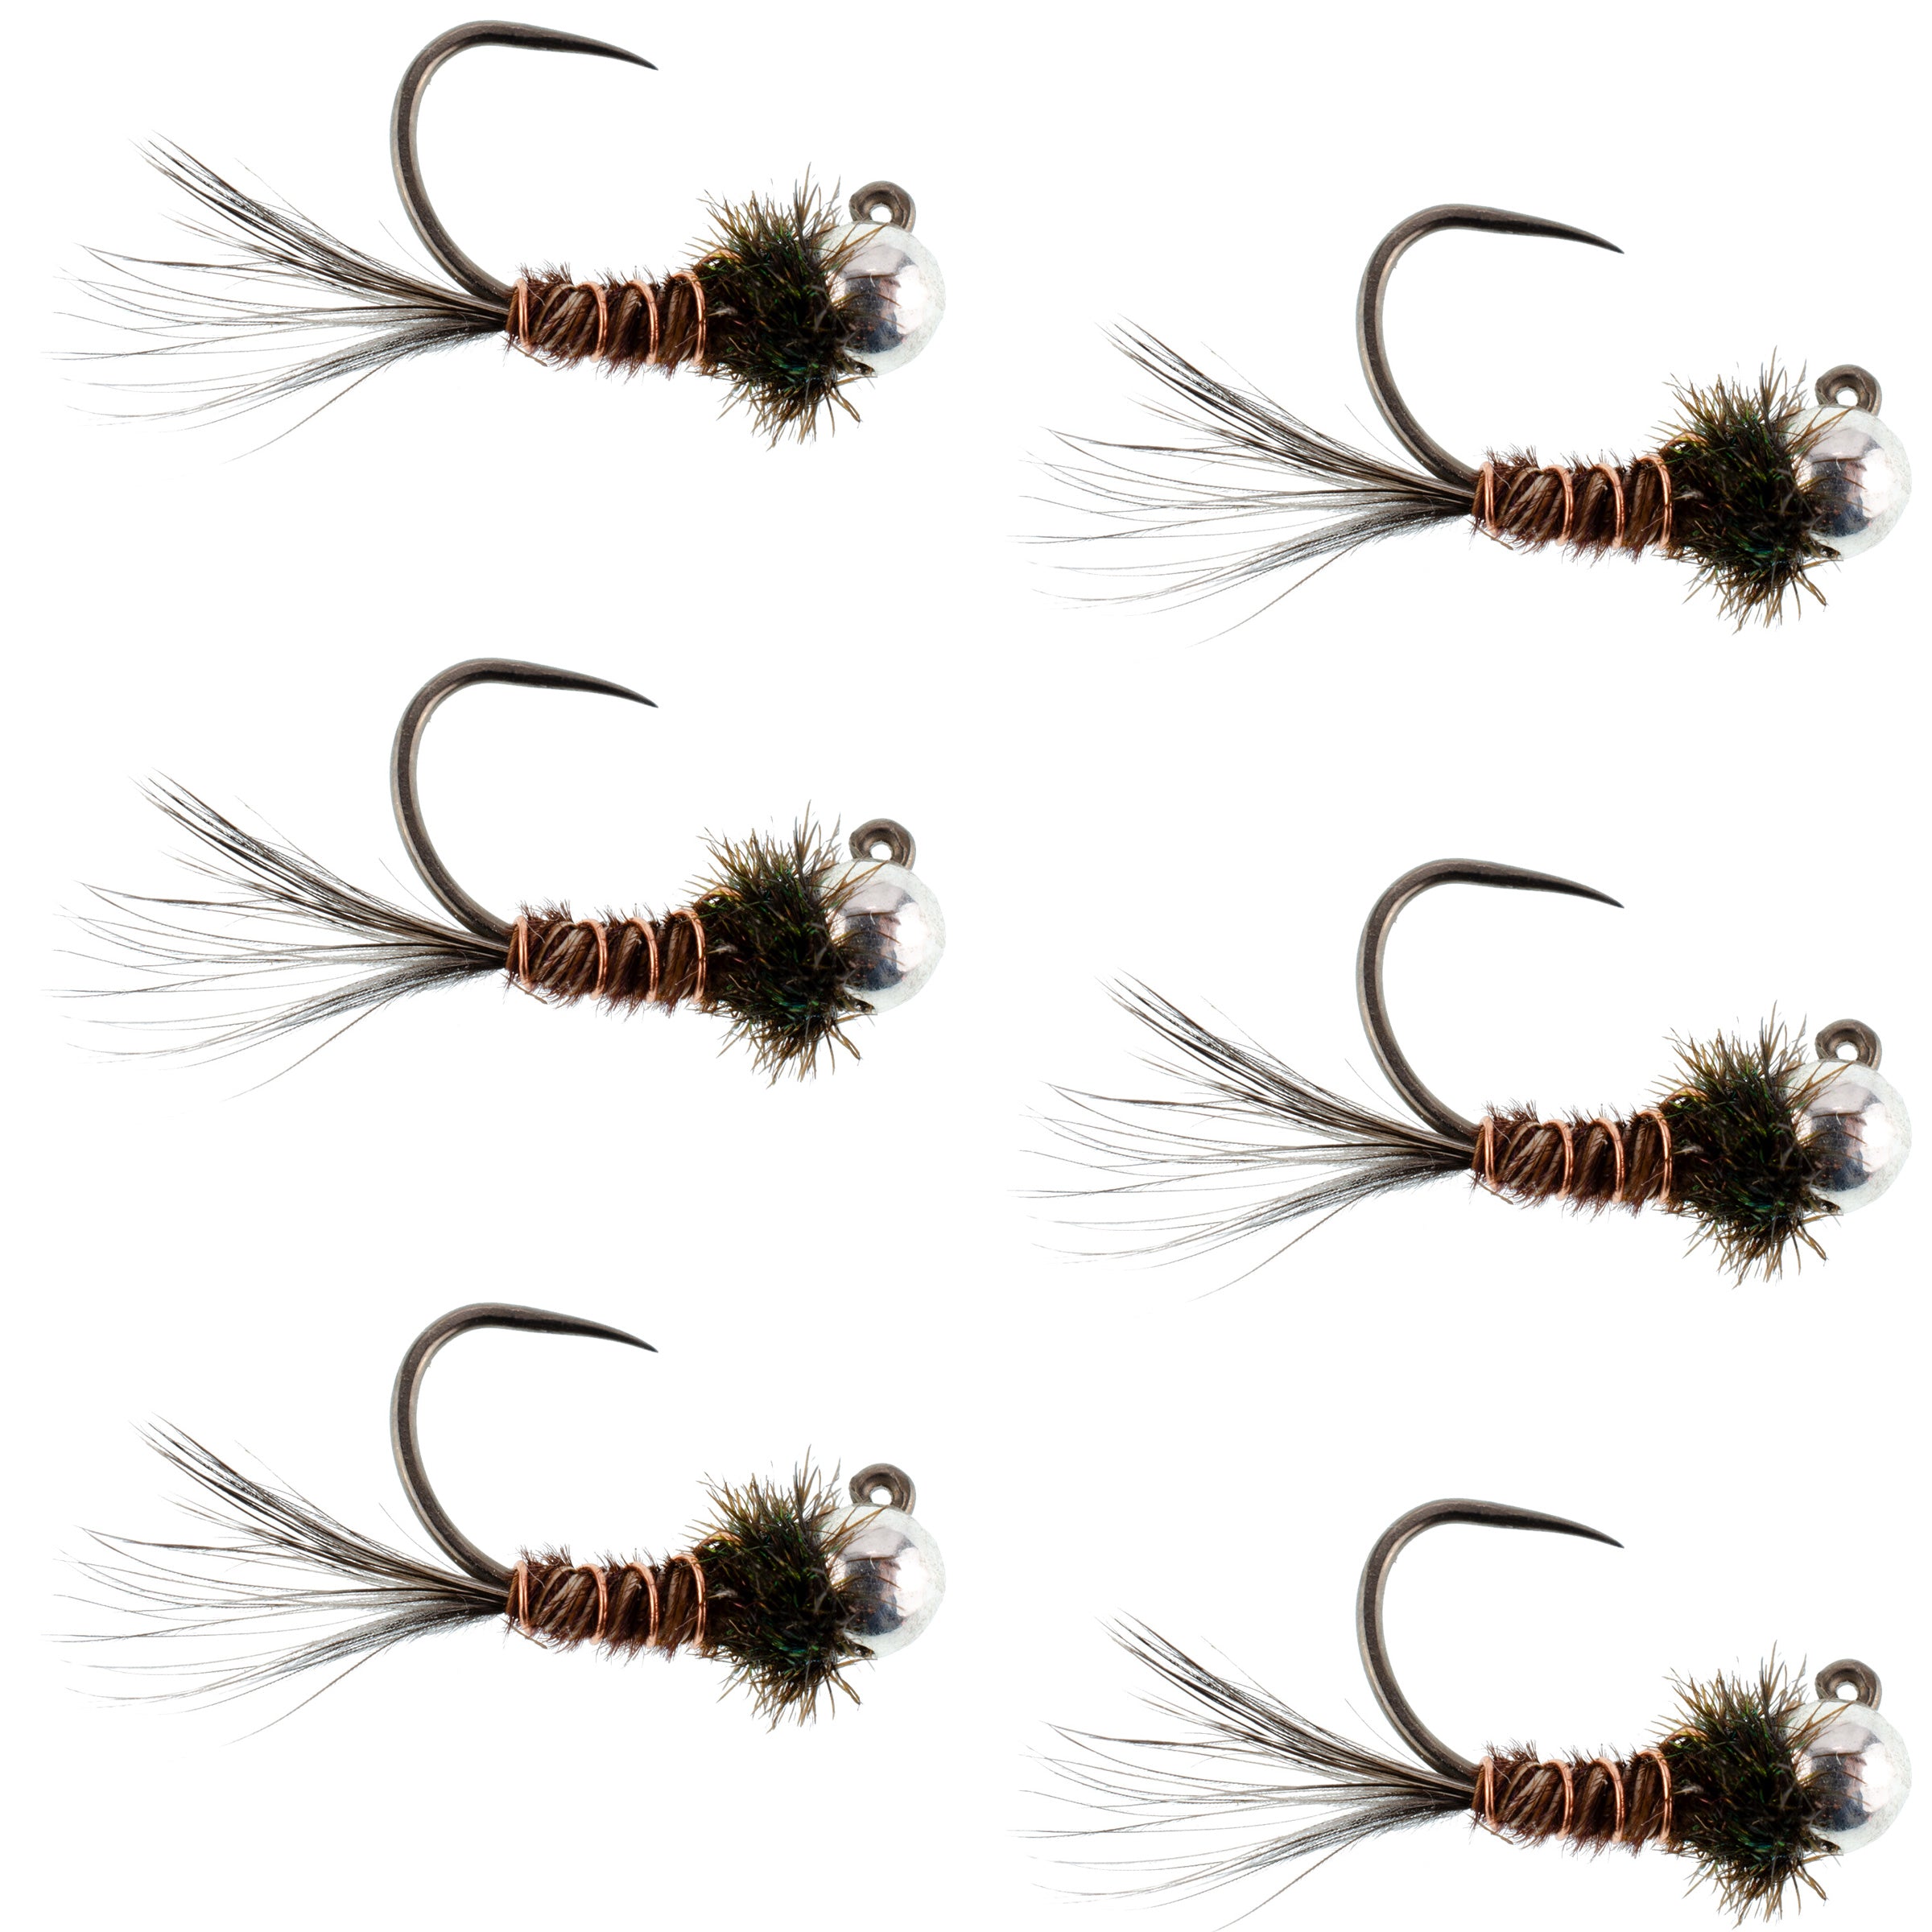 Tungsten Bead Pheasant Tail Tactical Jig Czech Nymph Euro Nymphing Fly - 6 Flies Size 16